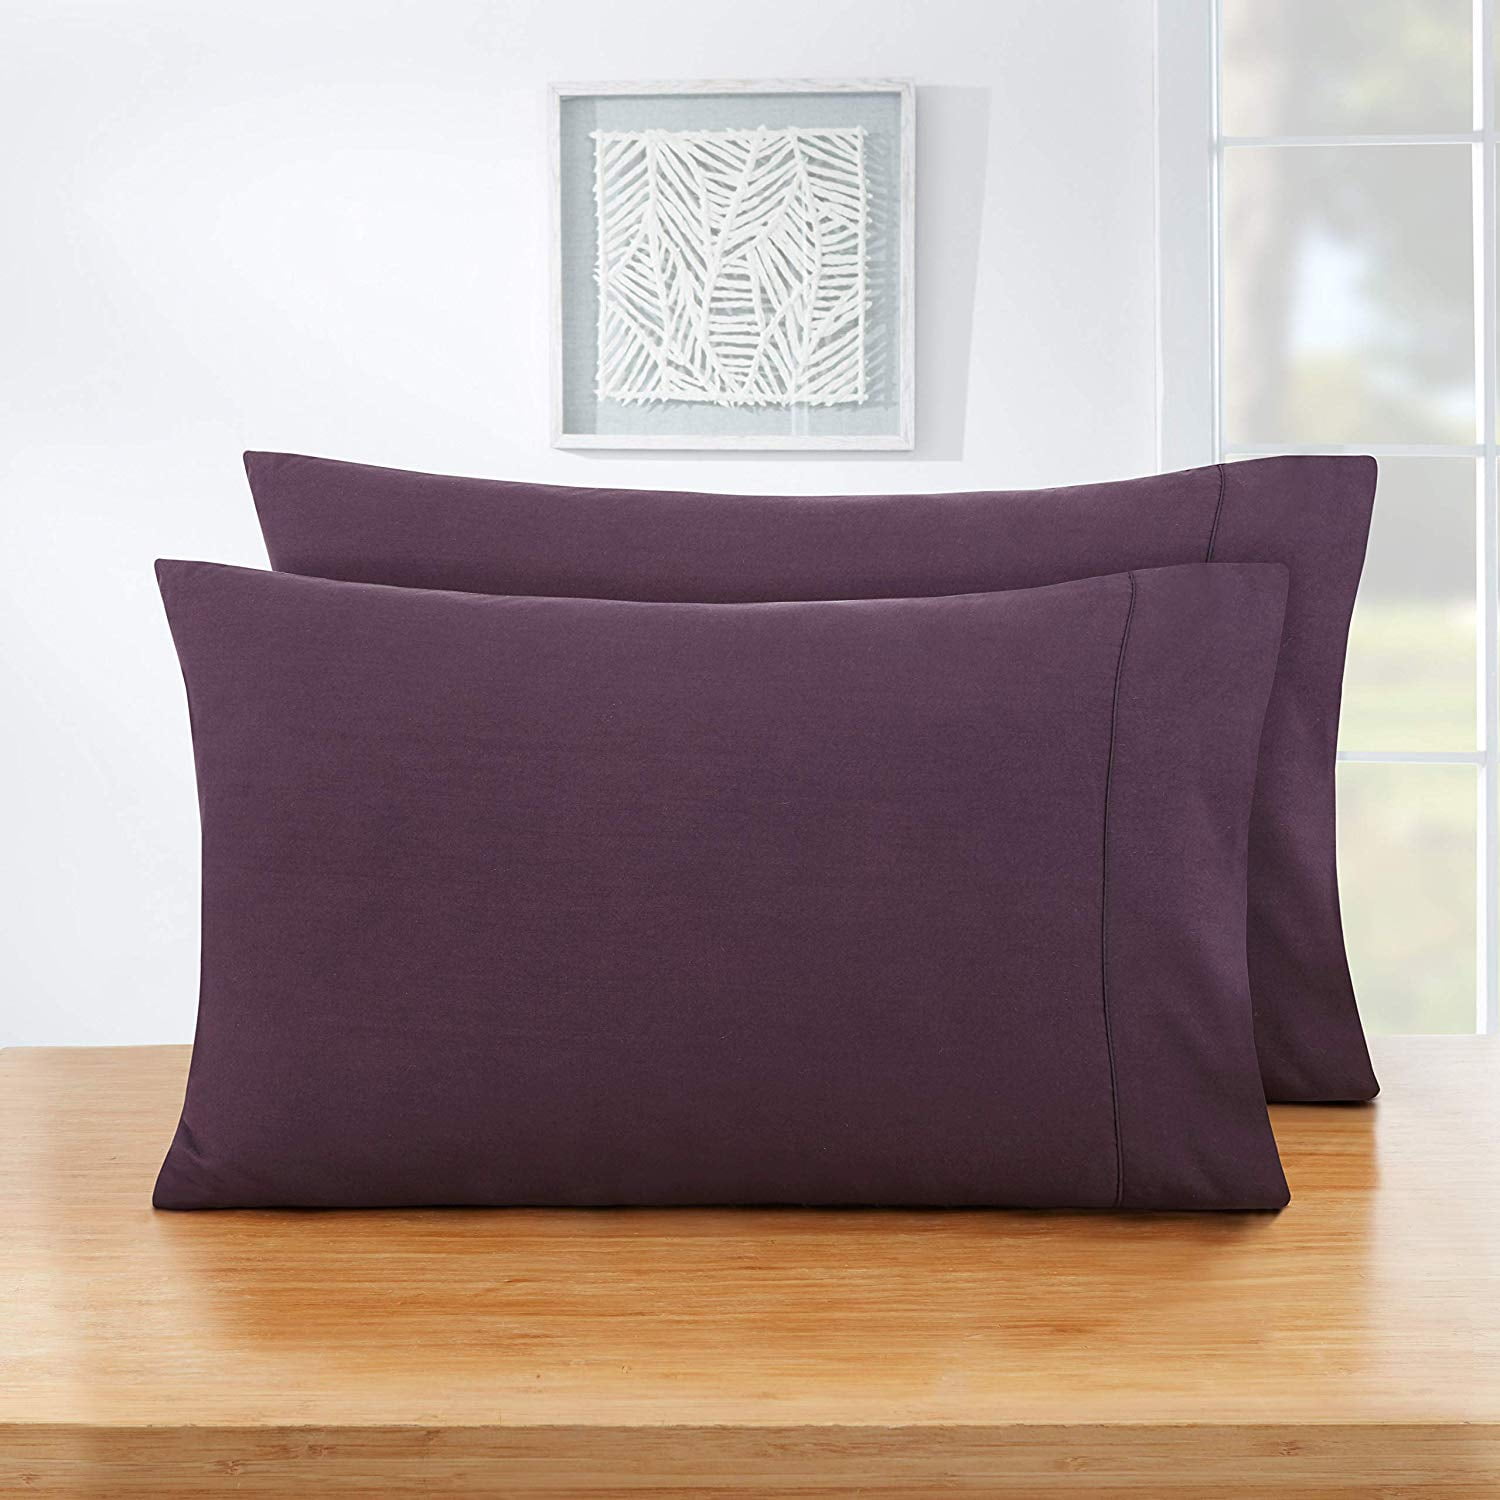 20 x 30 Inches Luxury Soft 2PC Pillow Cases Lavender New. 400 Thread Count Solid Pattern Pure Egyptian Cotton Twin XL